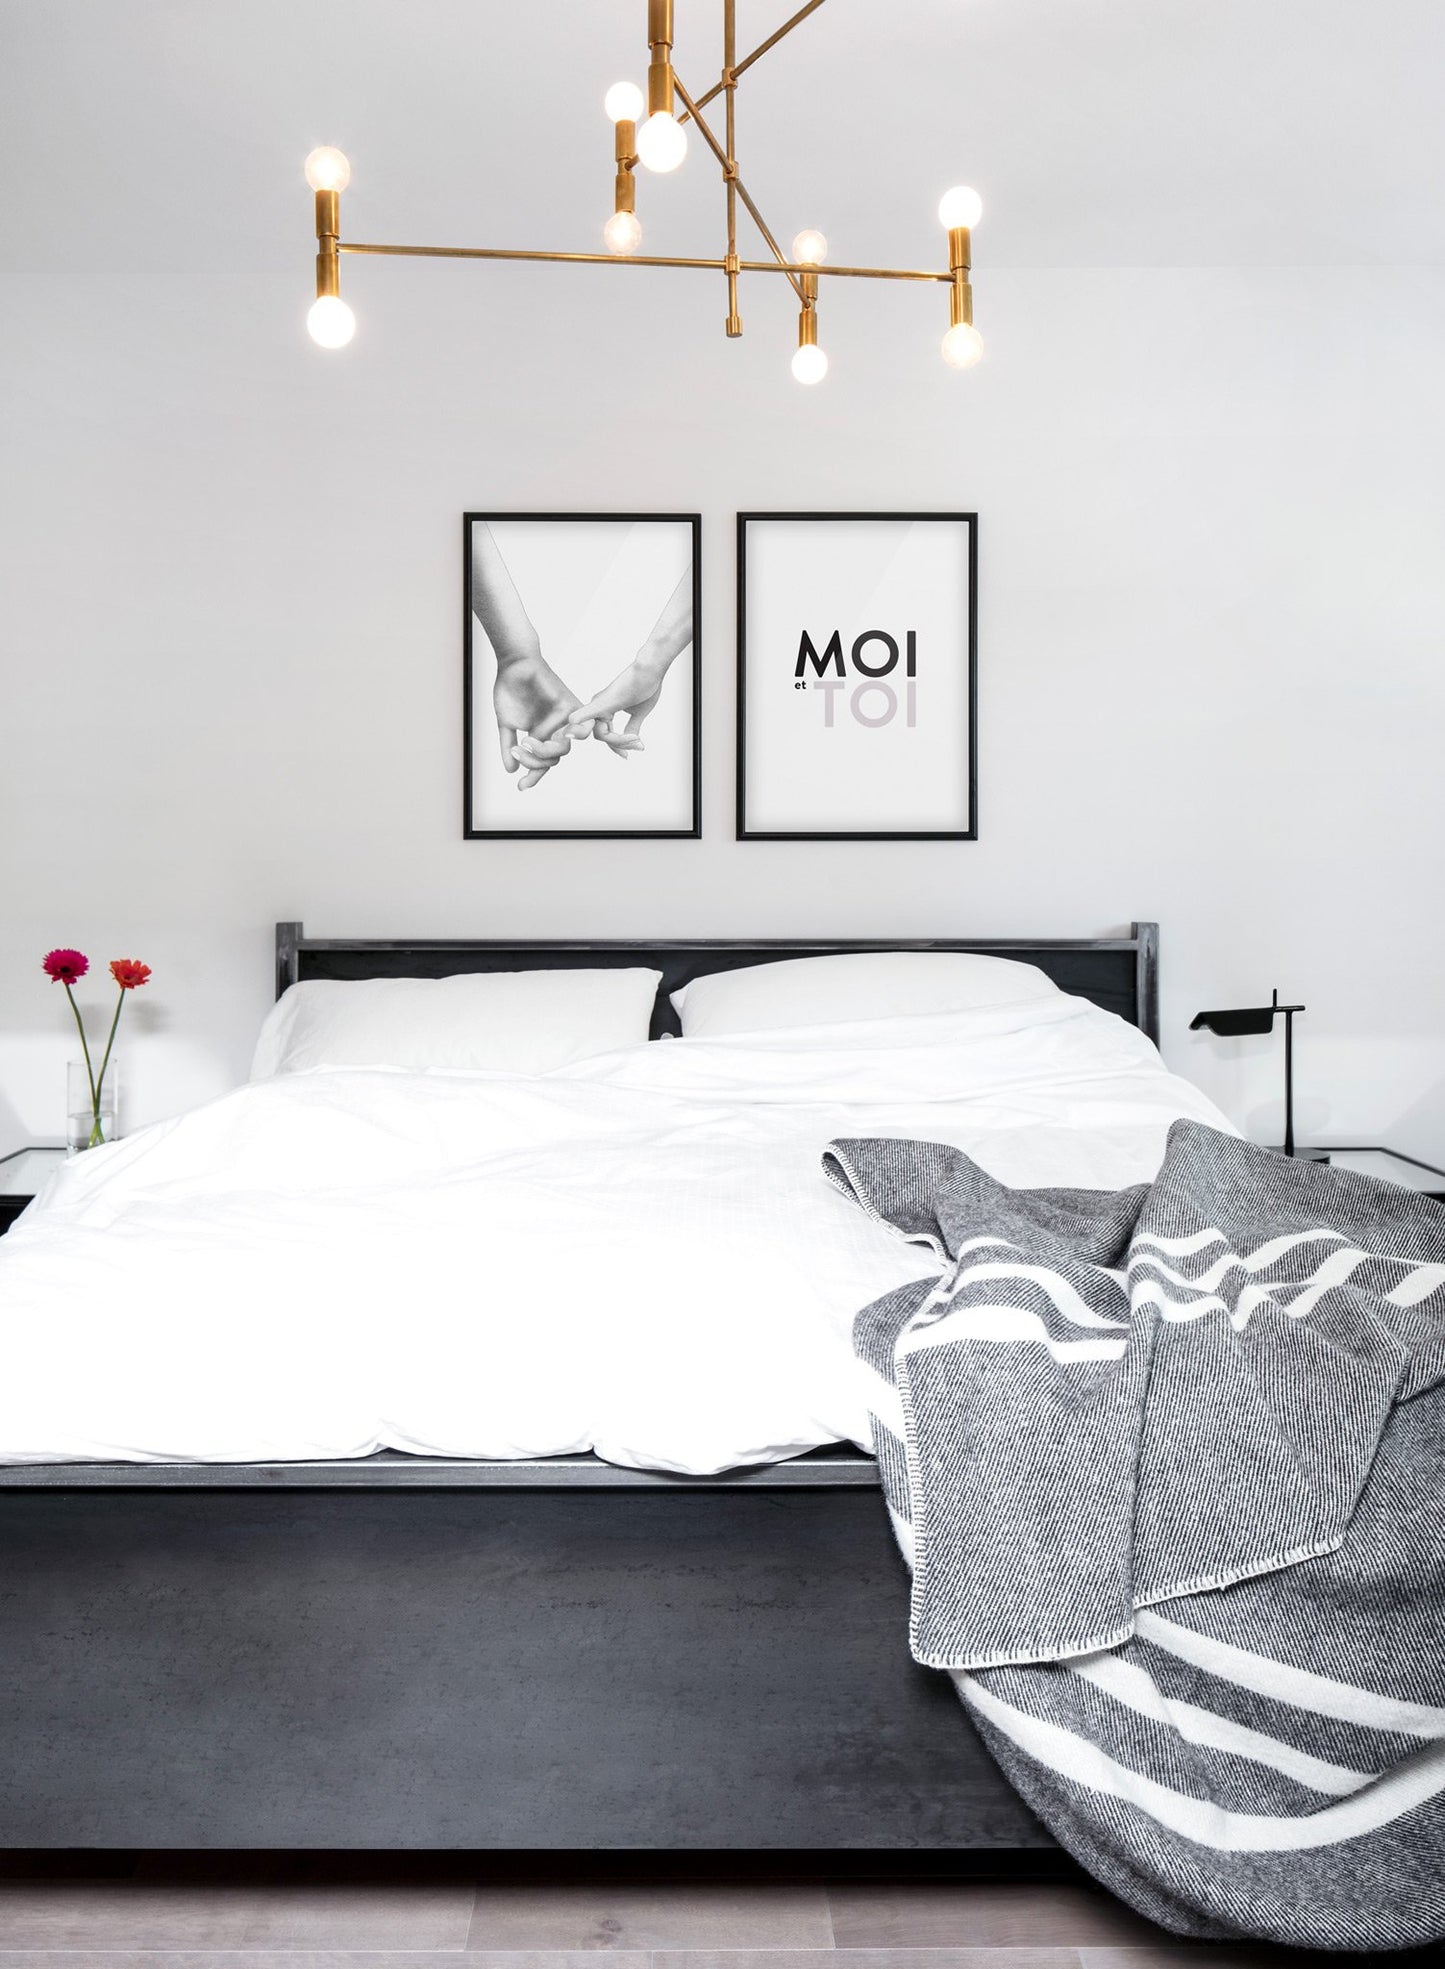 Scandinavian poster with black and white graphic typography design of Moi et toi (me and you) - Gallery Wall Duo - Romantic Bedroom